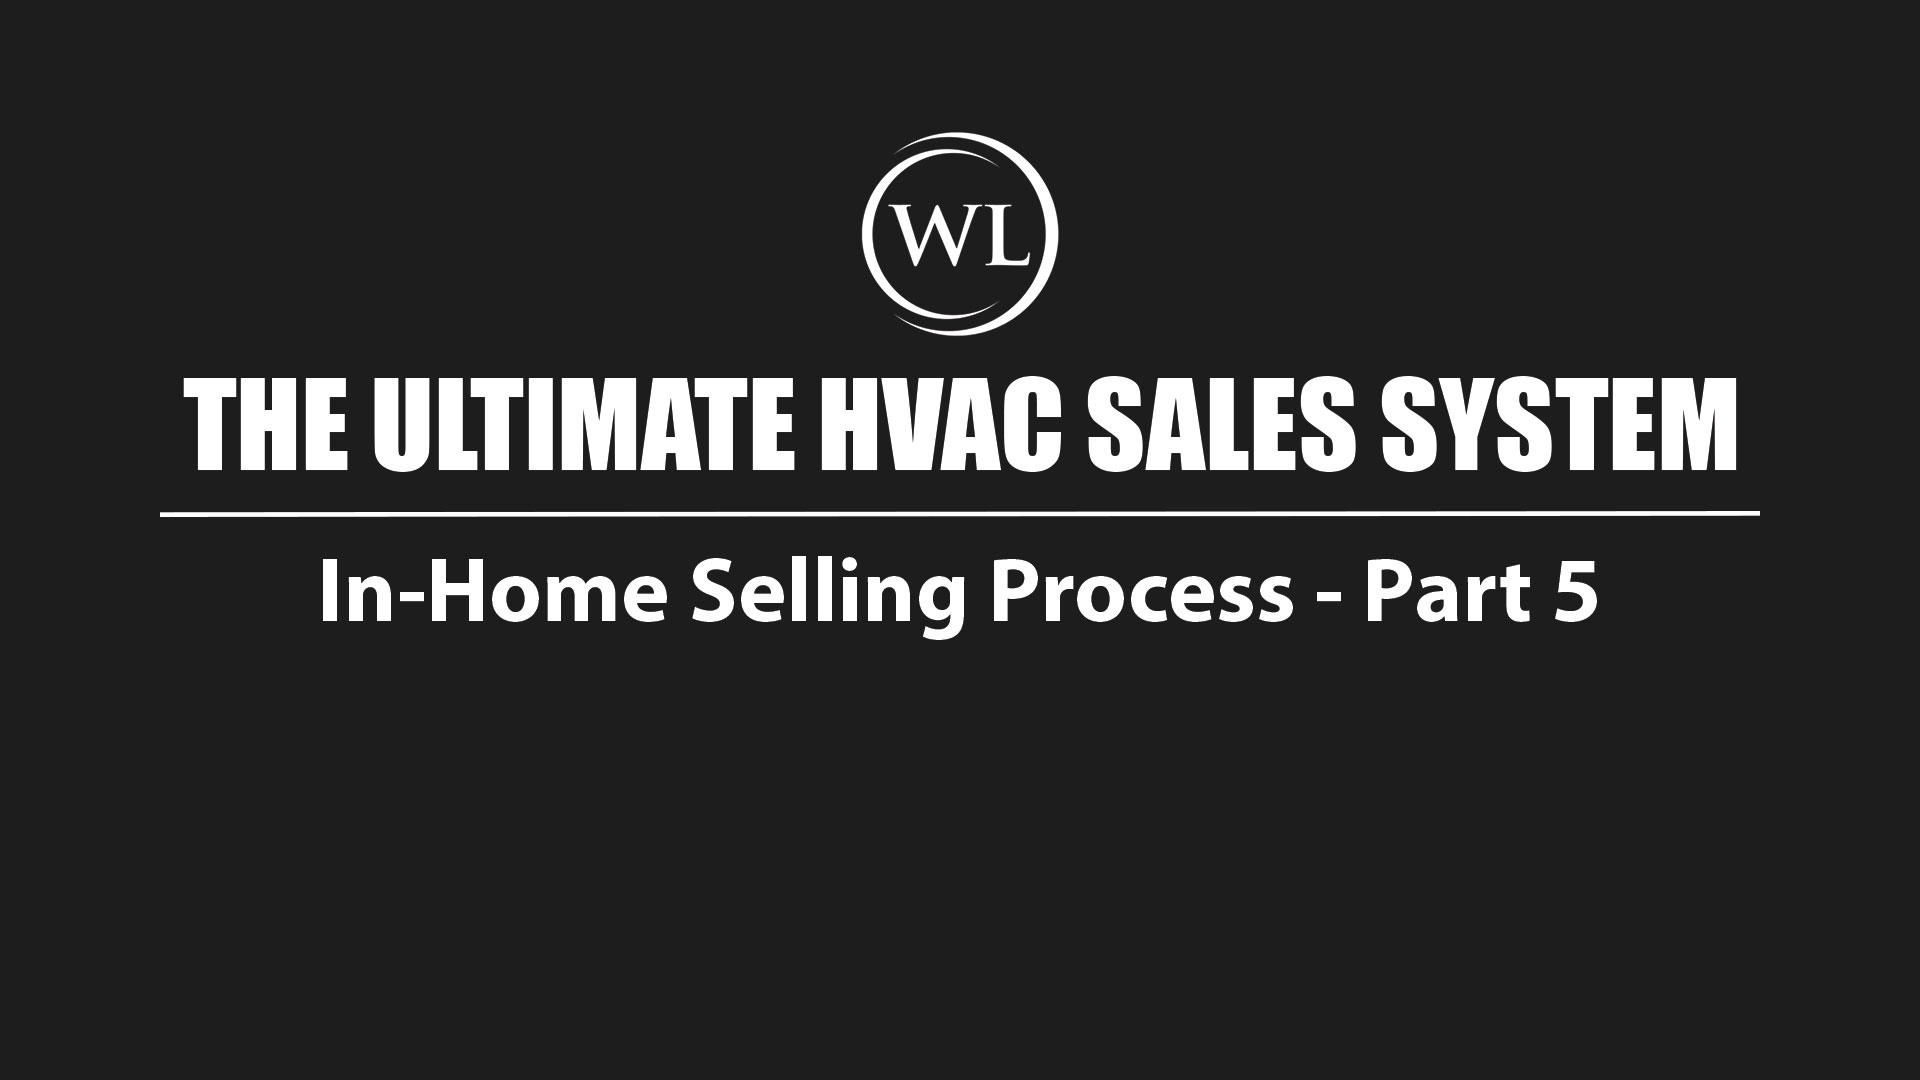 In-Home Selling Process – Part 5